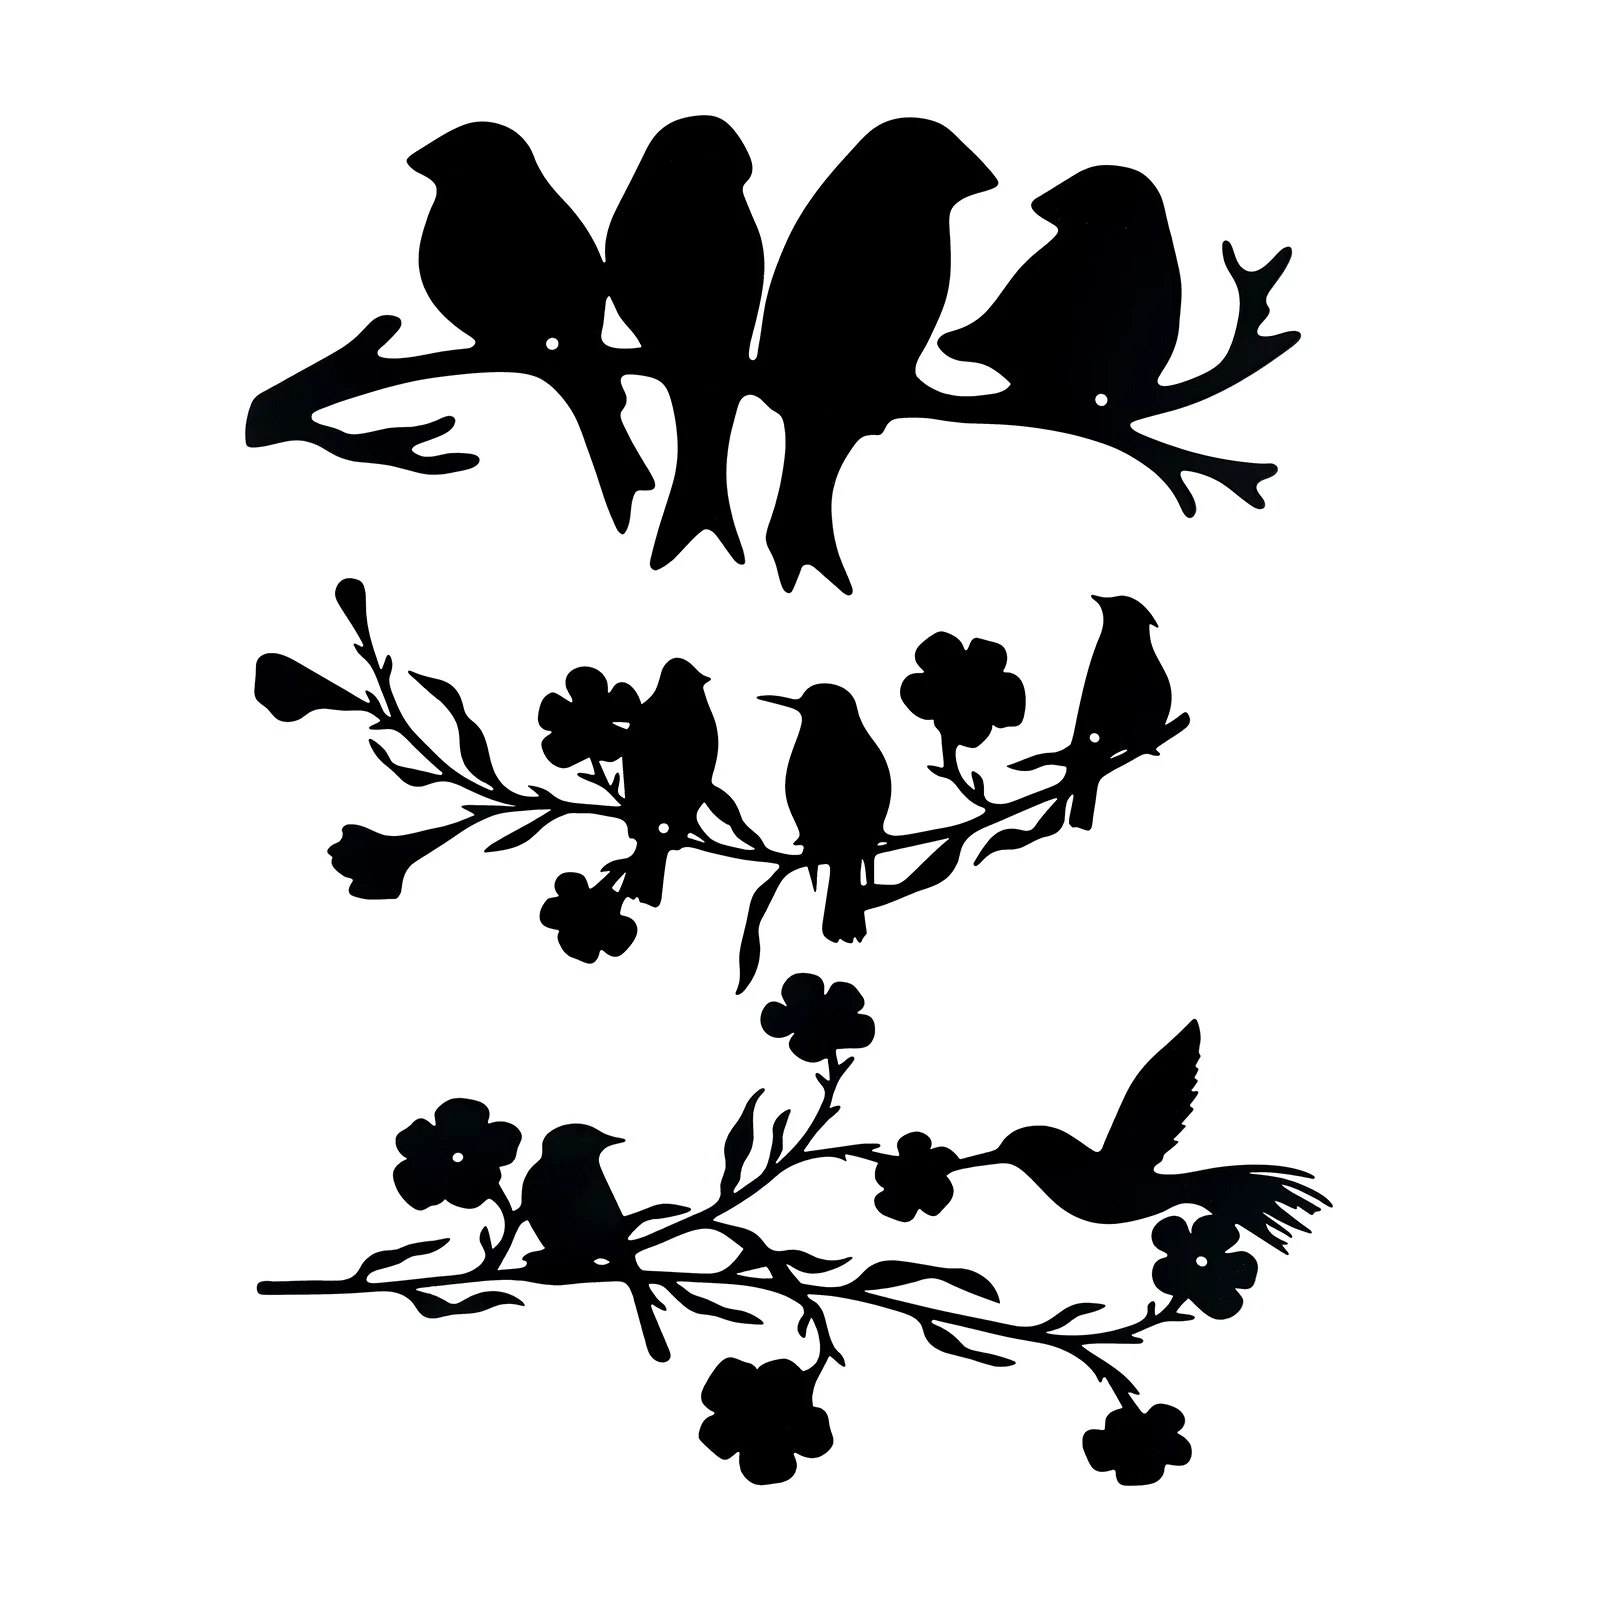 

3Pcs Barn Swallows Love Birds on Branch Metal Tree Art Bird Silhouette Wall Sculpture Hanging Sign for Office Home Living Room